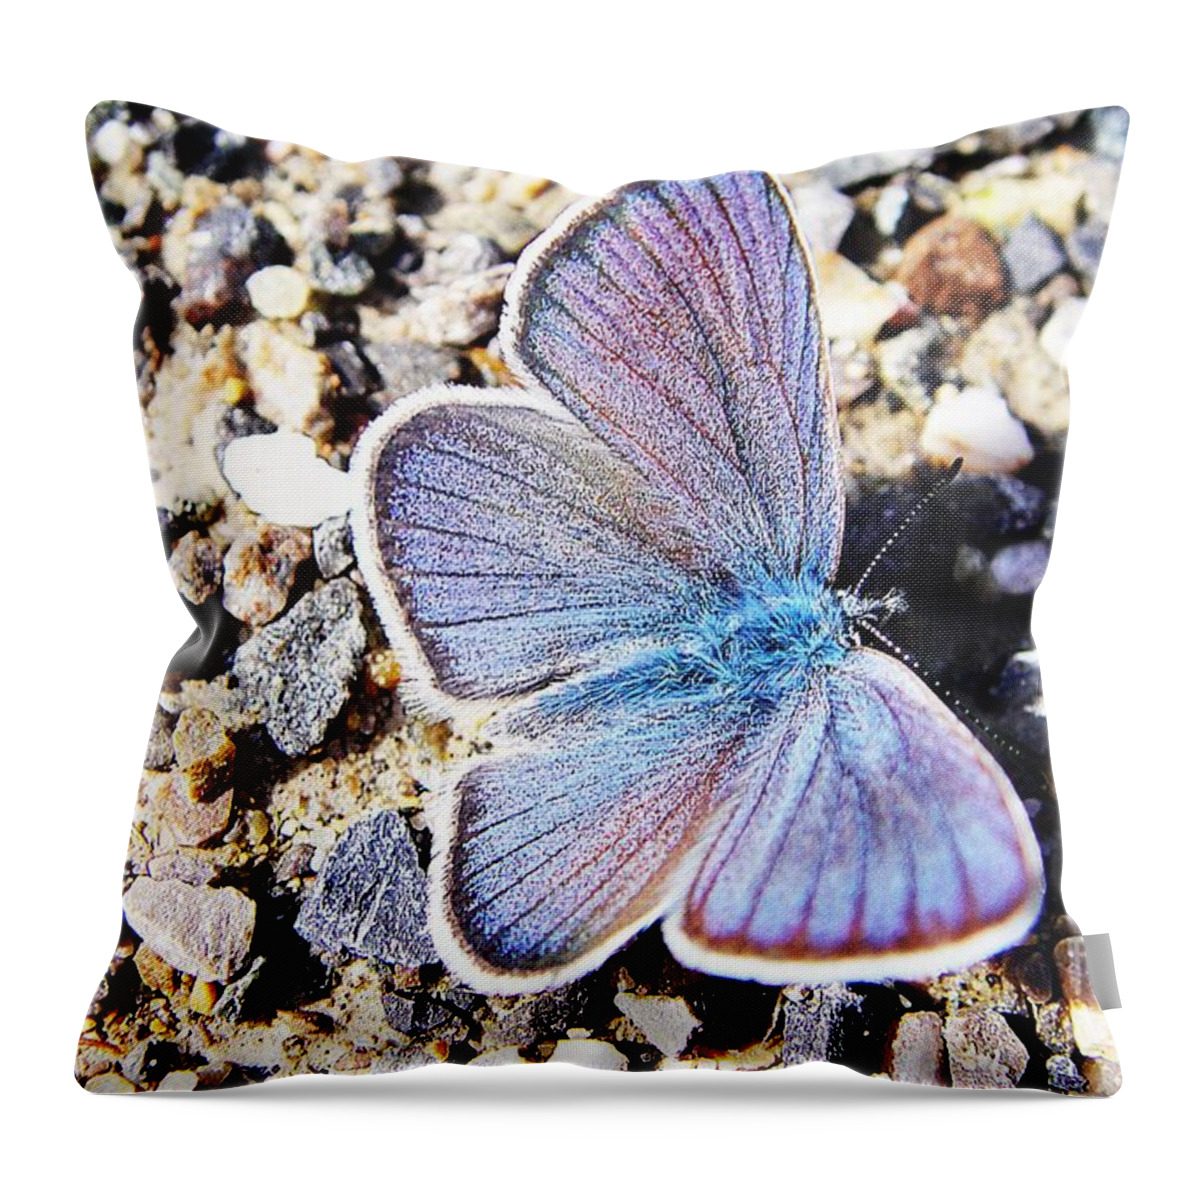 Butterfly Throw Pillow featuring the photograph Blue butterfly on gravel by Karin Ravasio